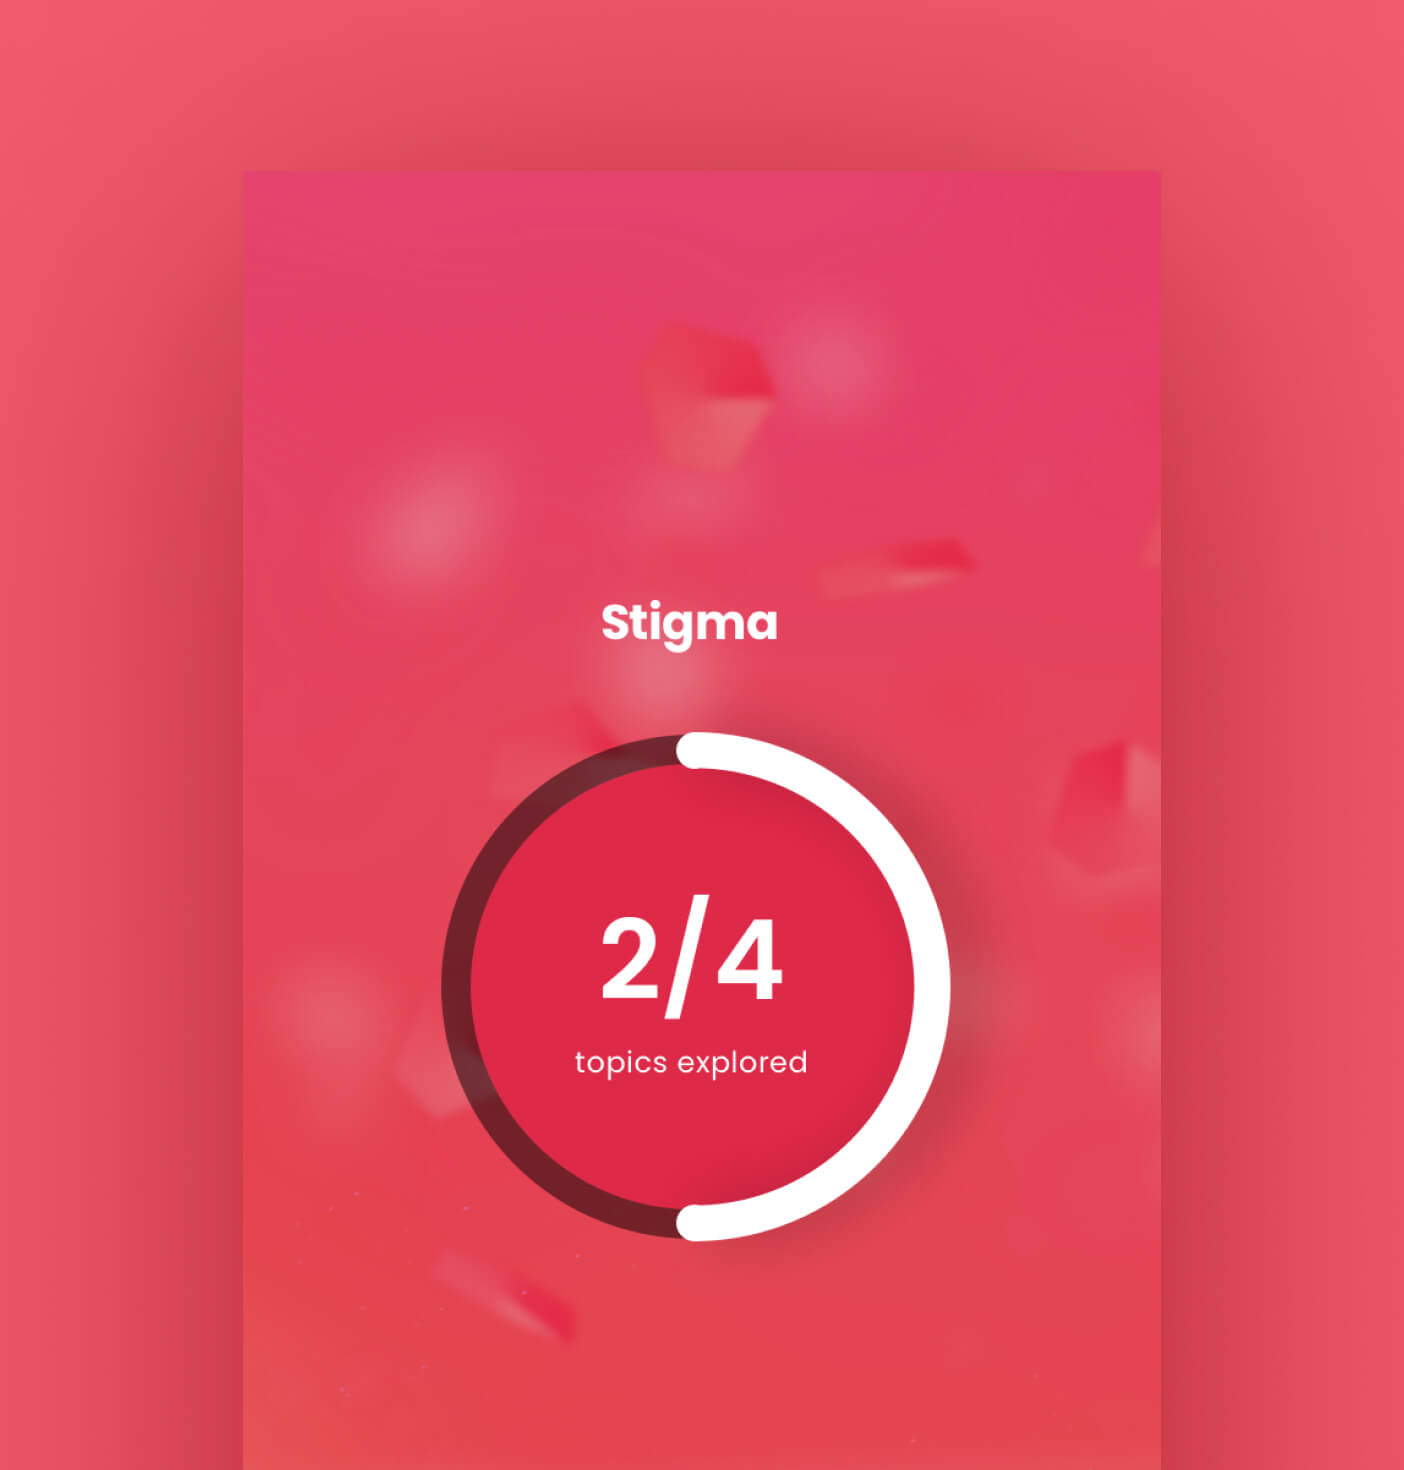 A screen showing that the Stigma topic is half completed.